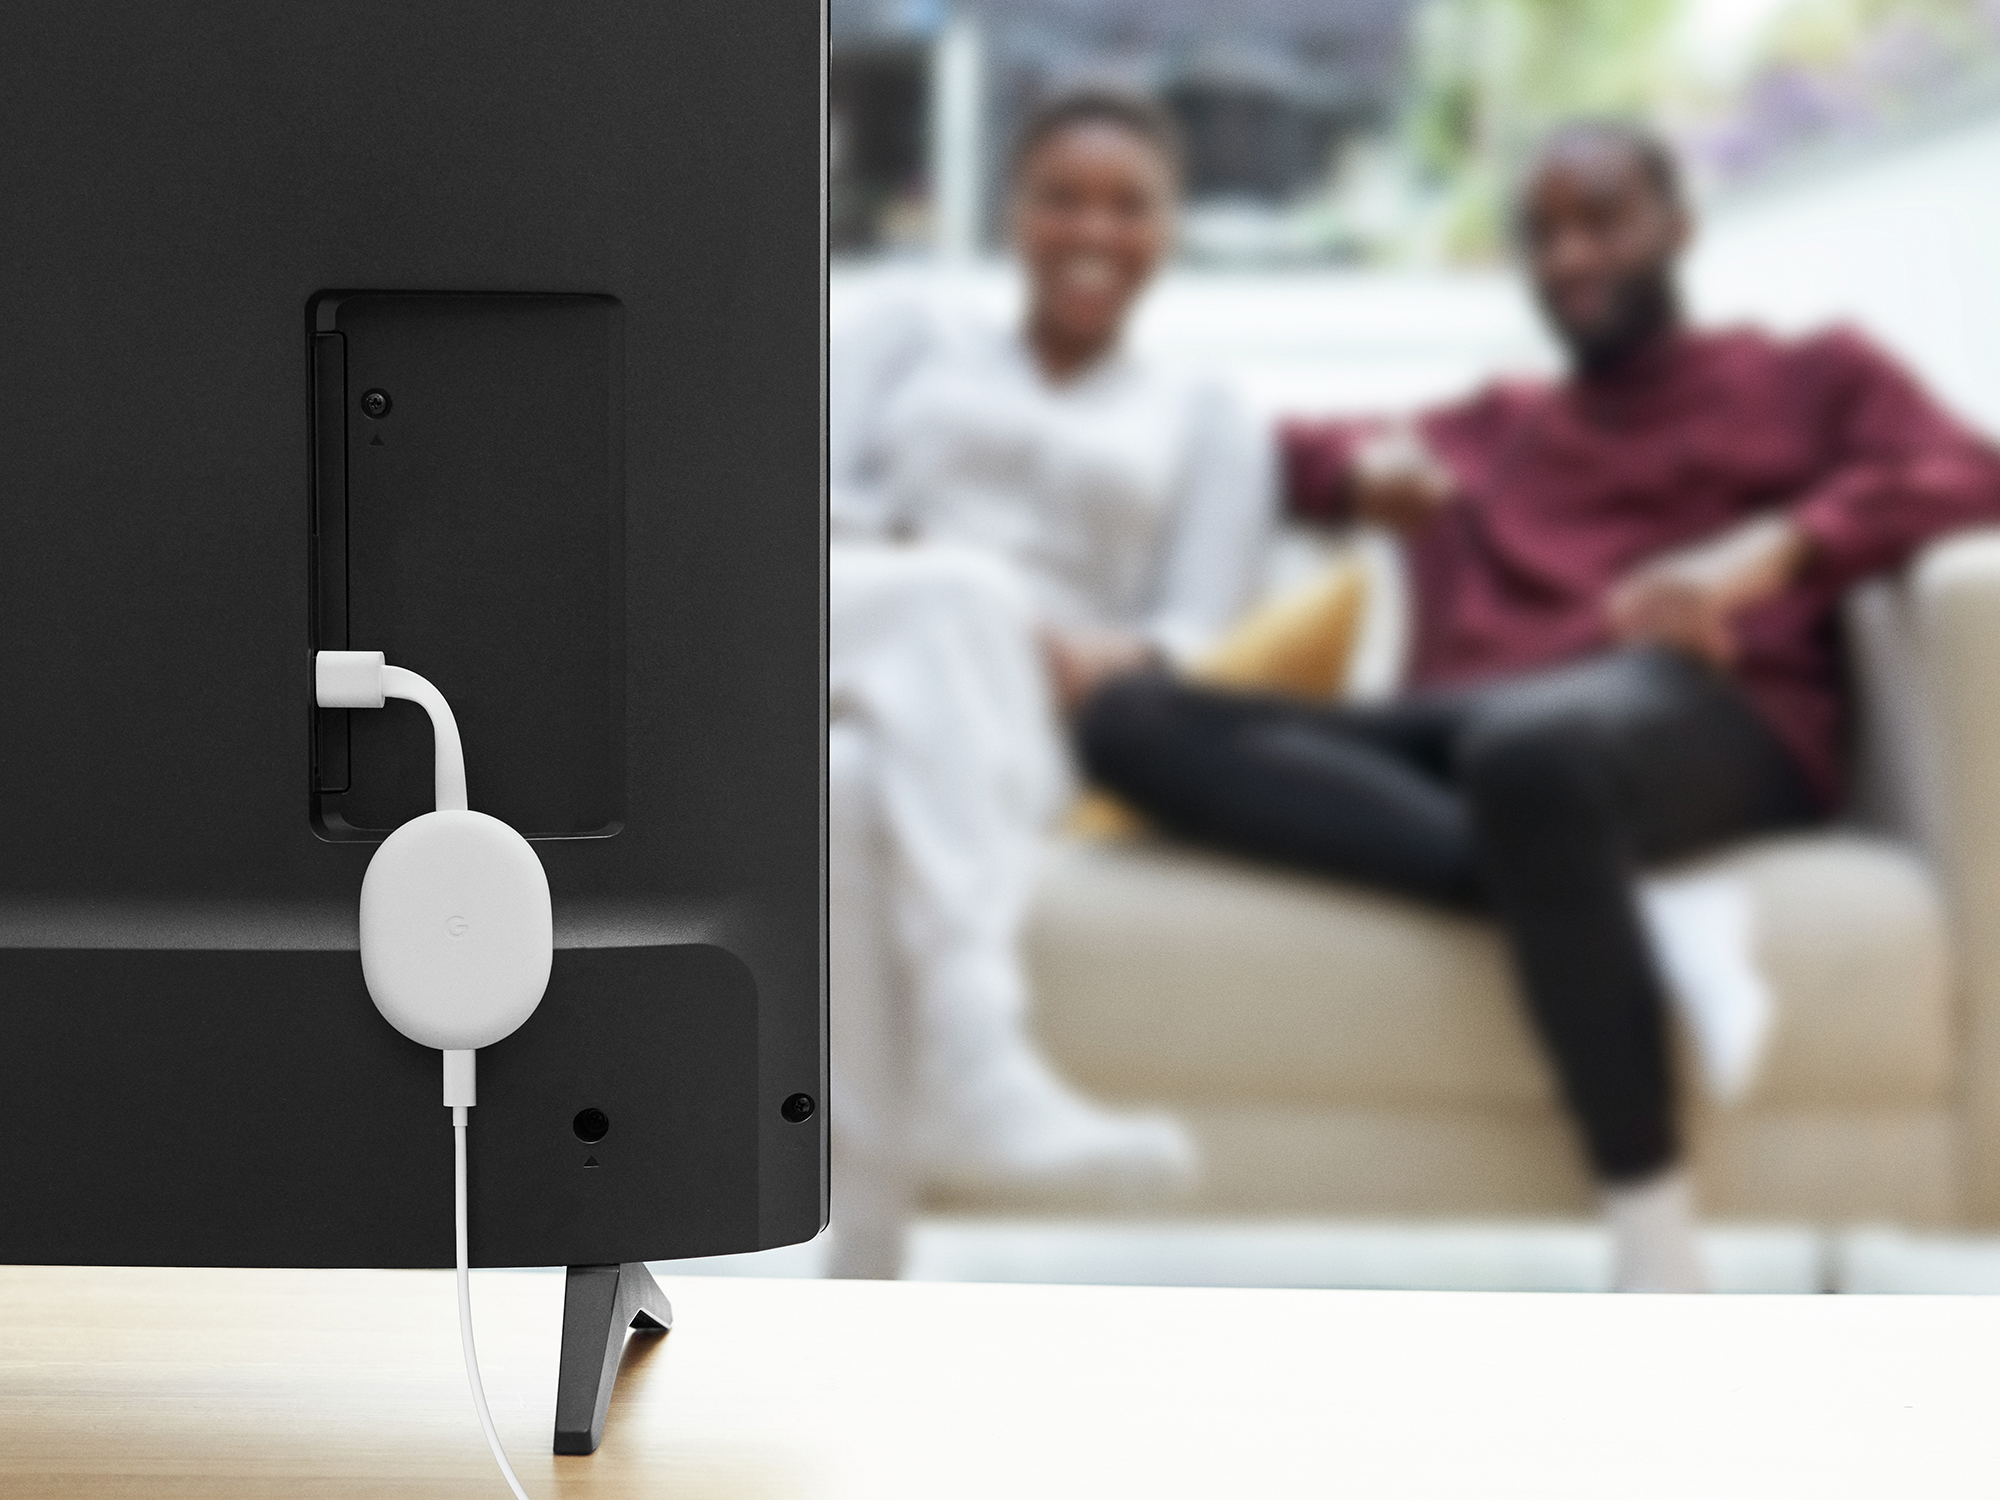 The new Chromecast with Google TV will get an Ethernet adapter